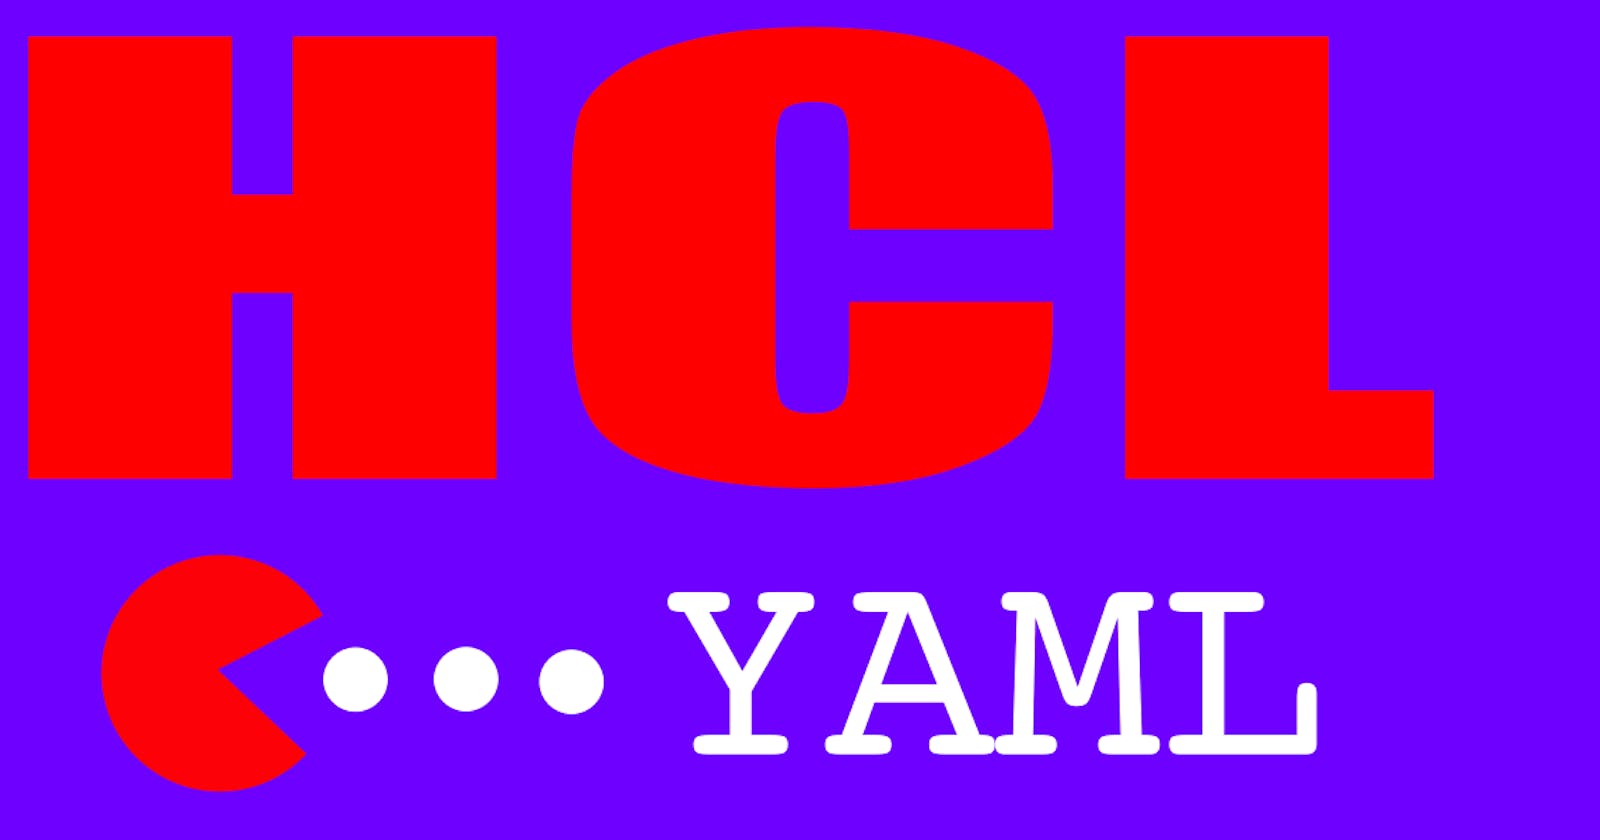 Hate YAML? Build your next tool with HCL!